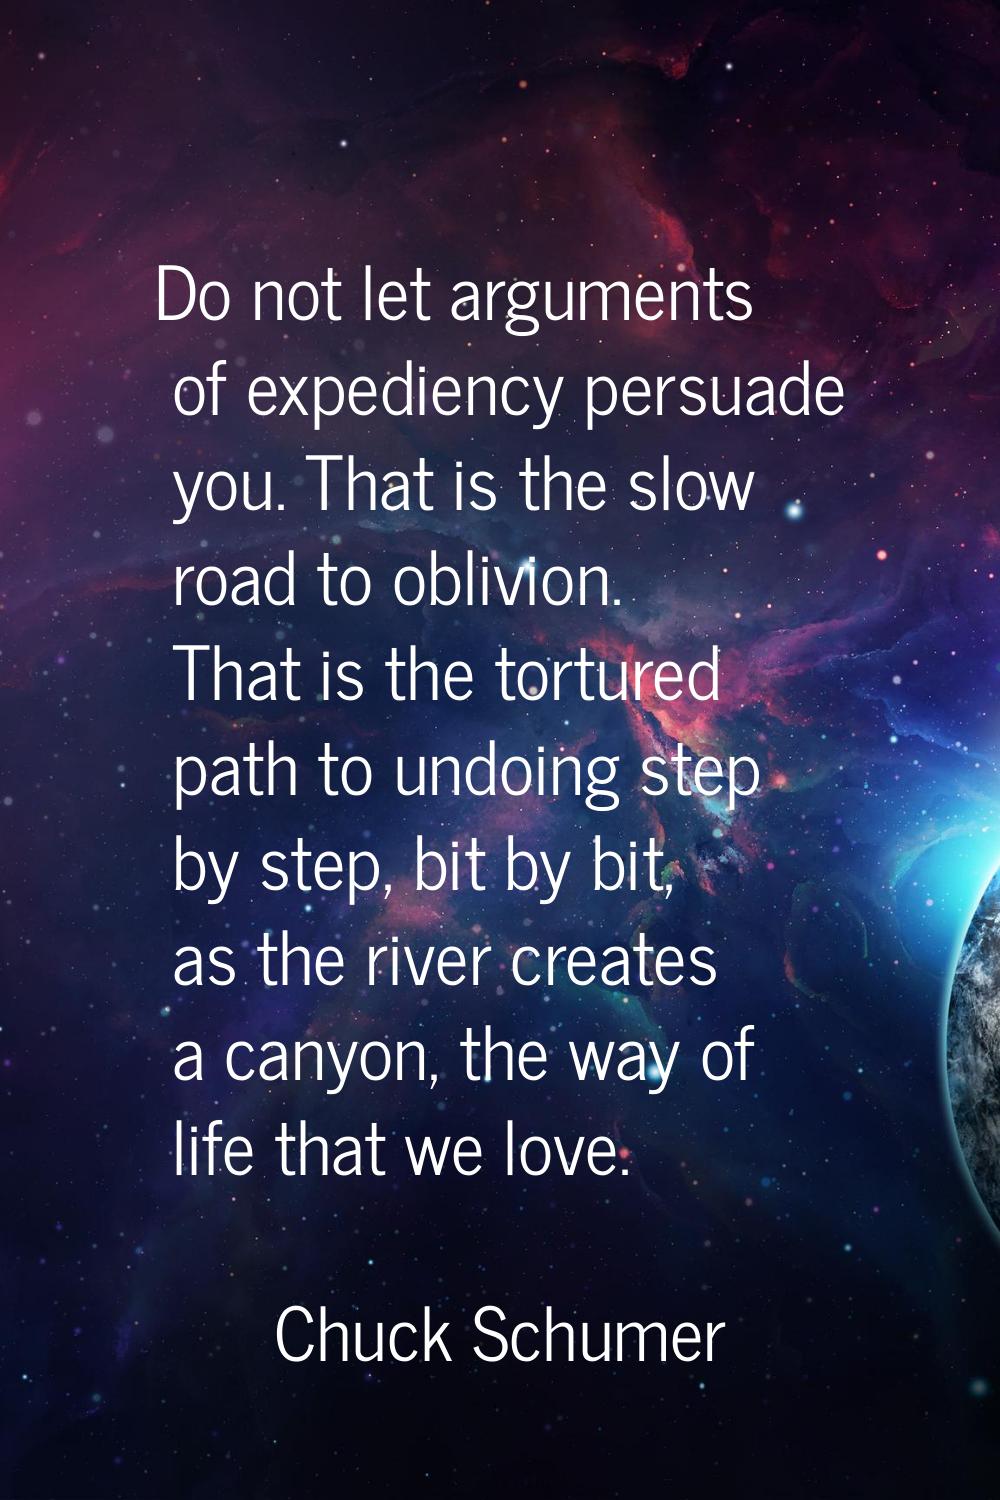 Do not let arguments of expediency persuade you. That is the slow road to oblivion. That is the tor